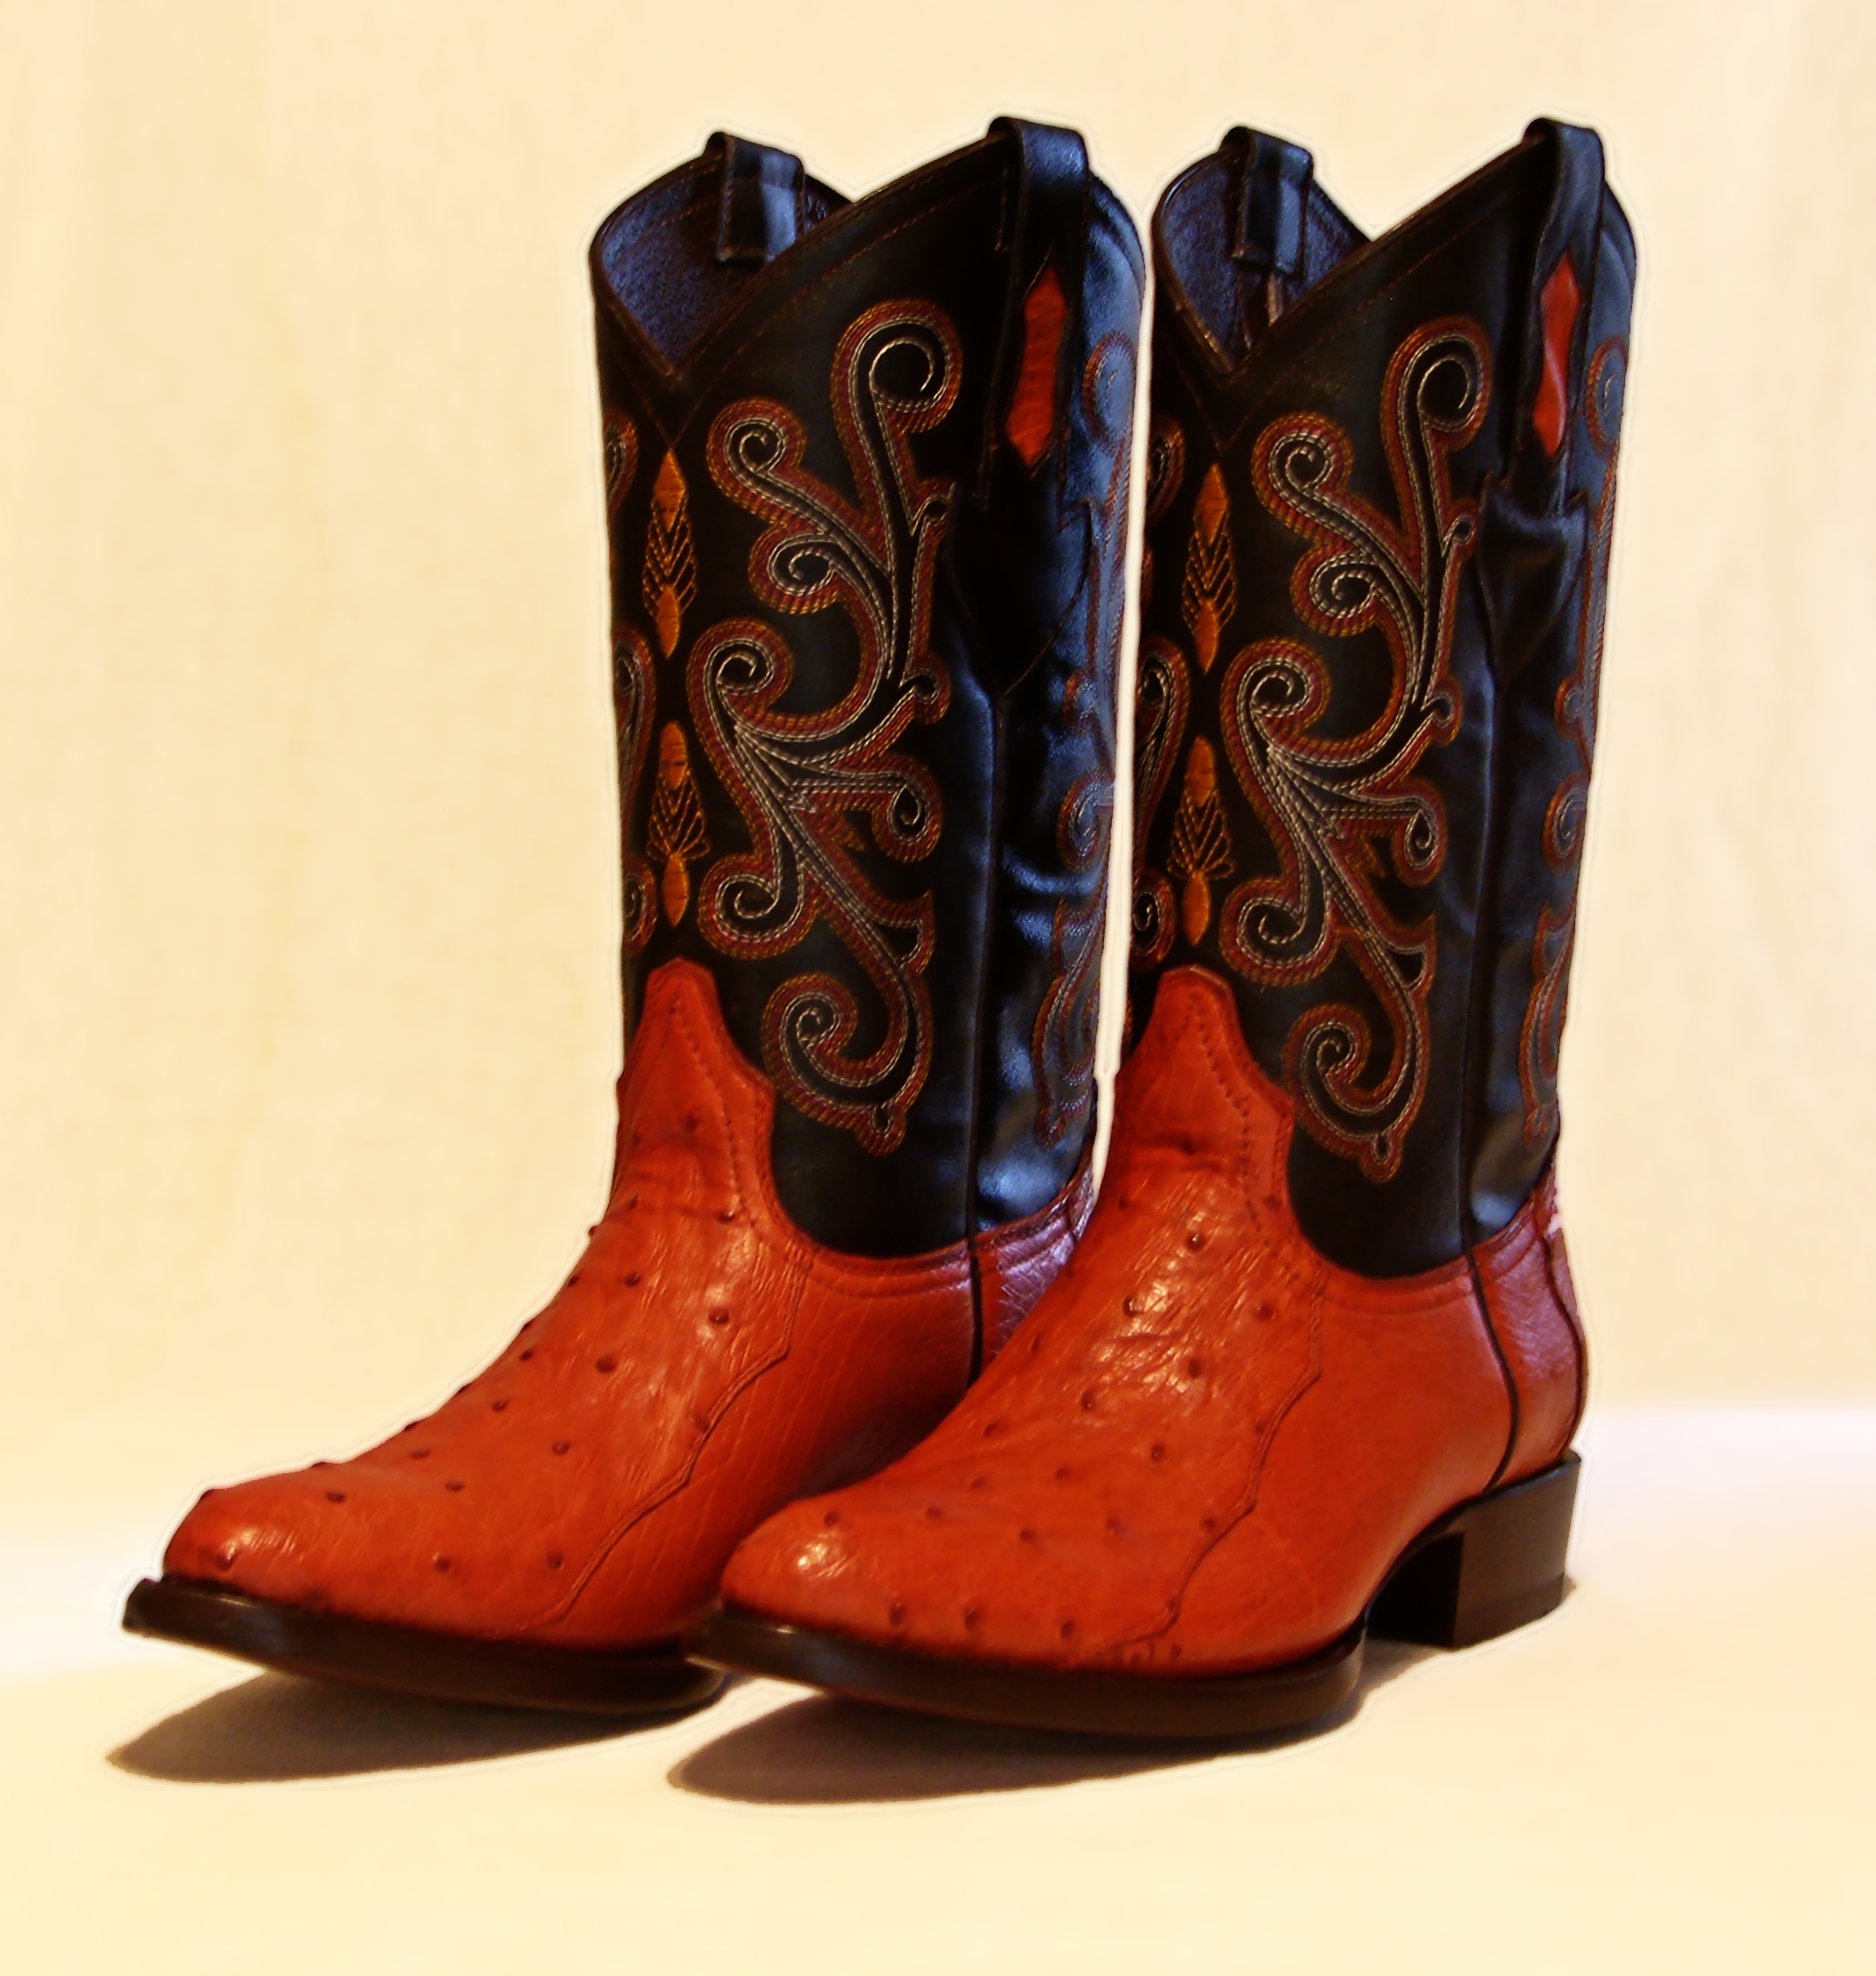 New exotic boots, Boots, Brown, Clothing, Cowboy, HQ Photo